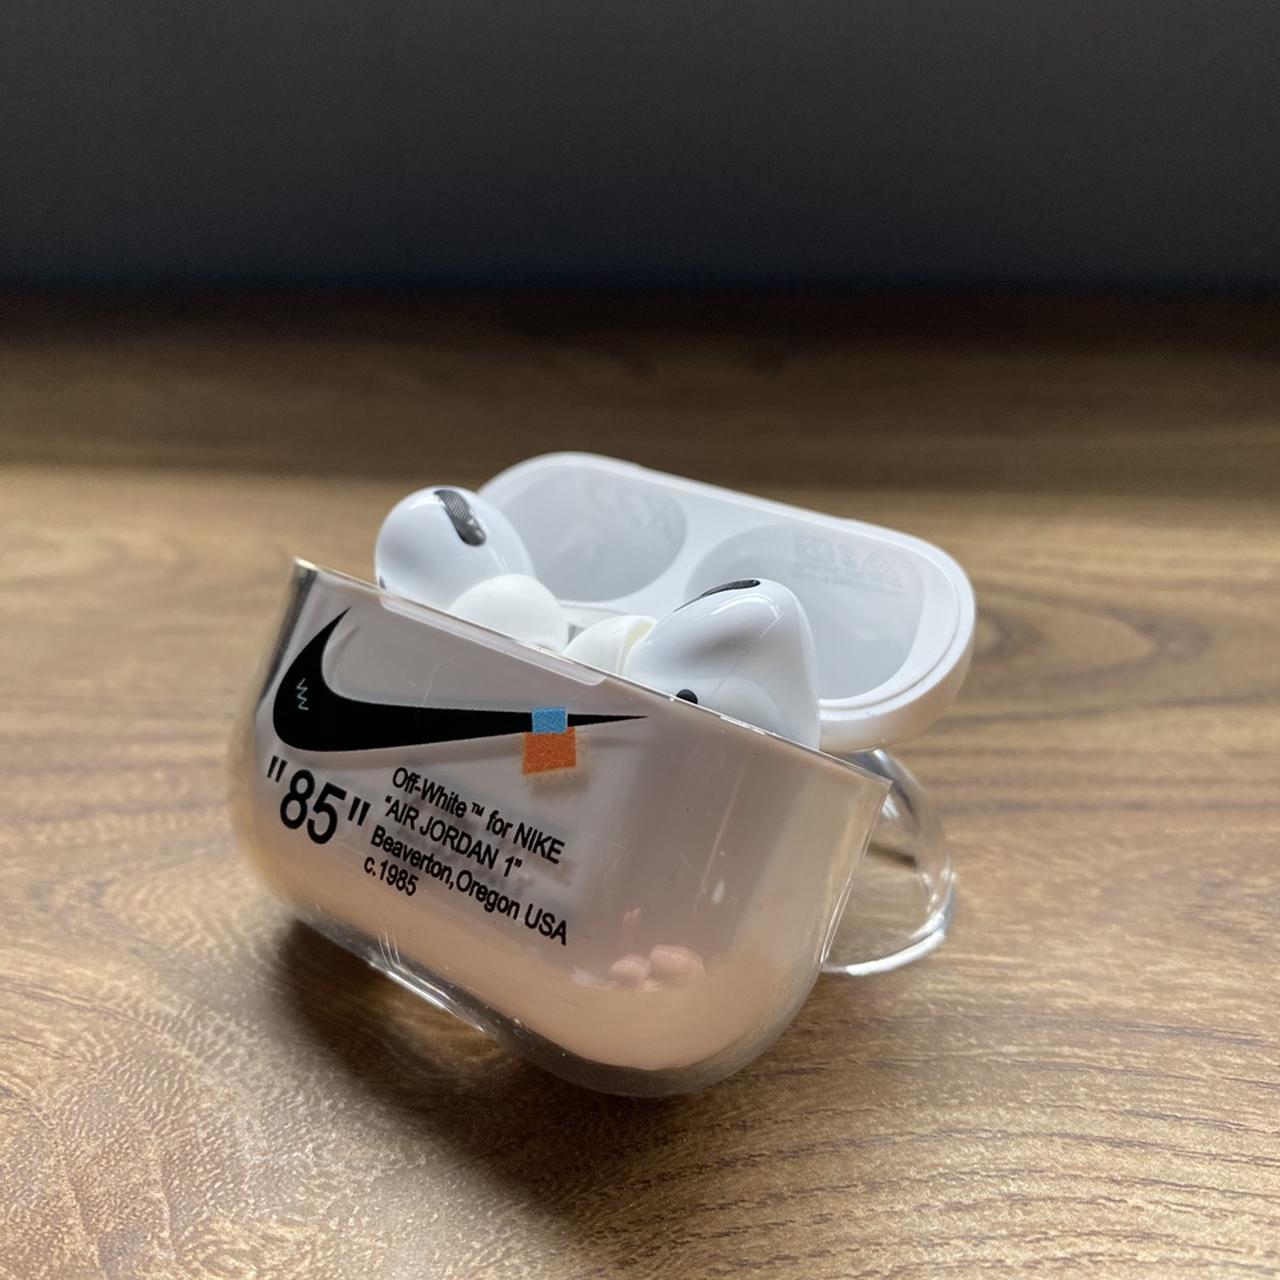 Zenuw Dor Antipoison Nike x Off White Apple Airpods Case for Apple AirPod... - Depop